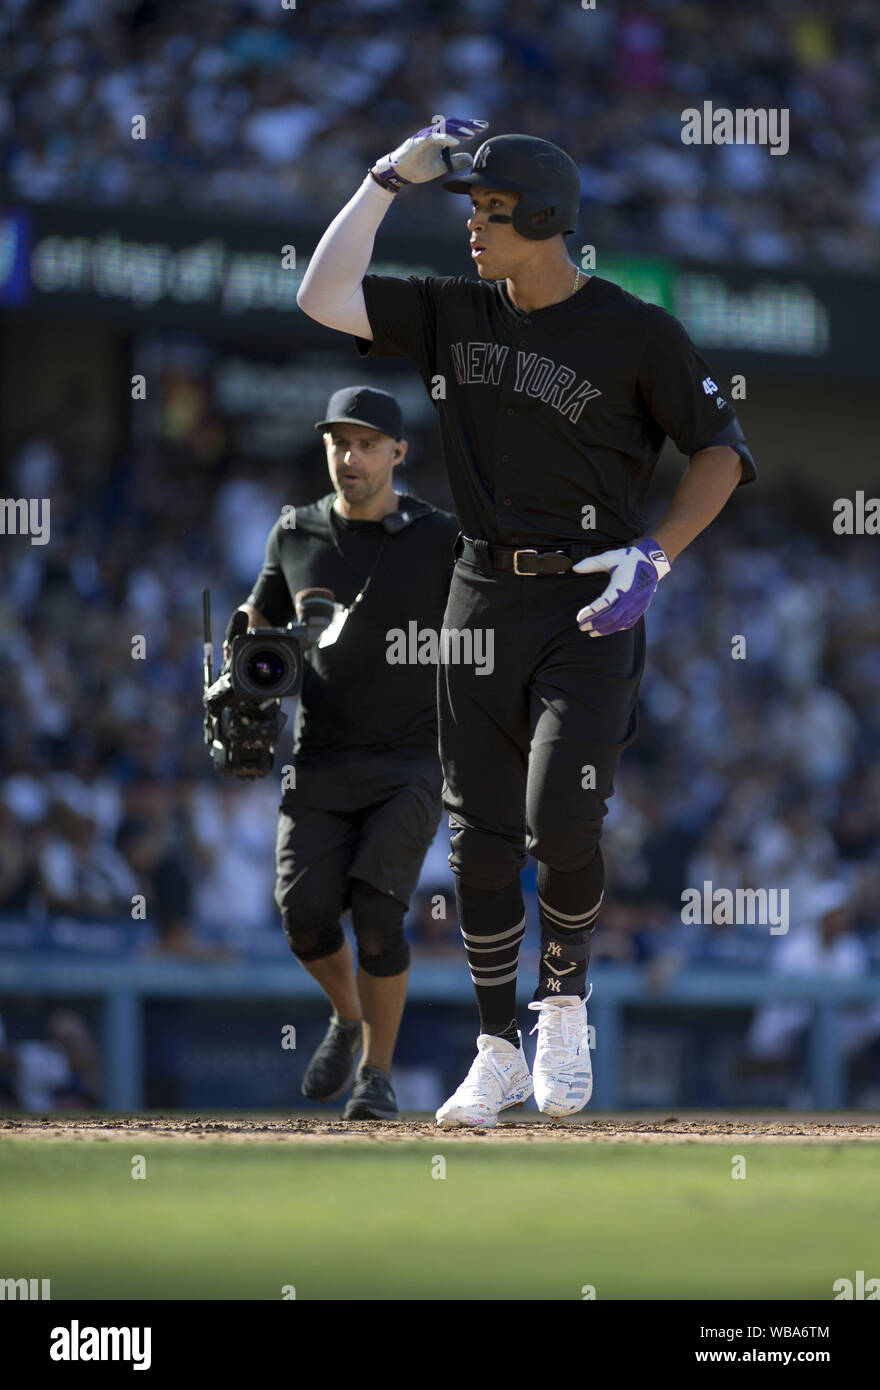 Los Angeles, CALIFORNIA, USA. 25th Aug, 2019. Aaron Judge #99 of the New  York Yankees crosses the plate after hitting a solo home run in the third  inning of the game against